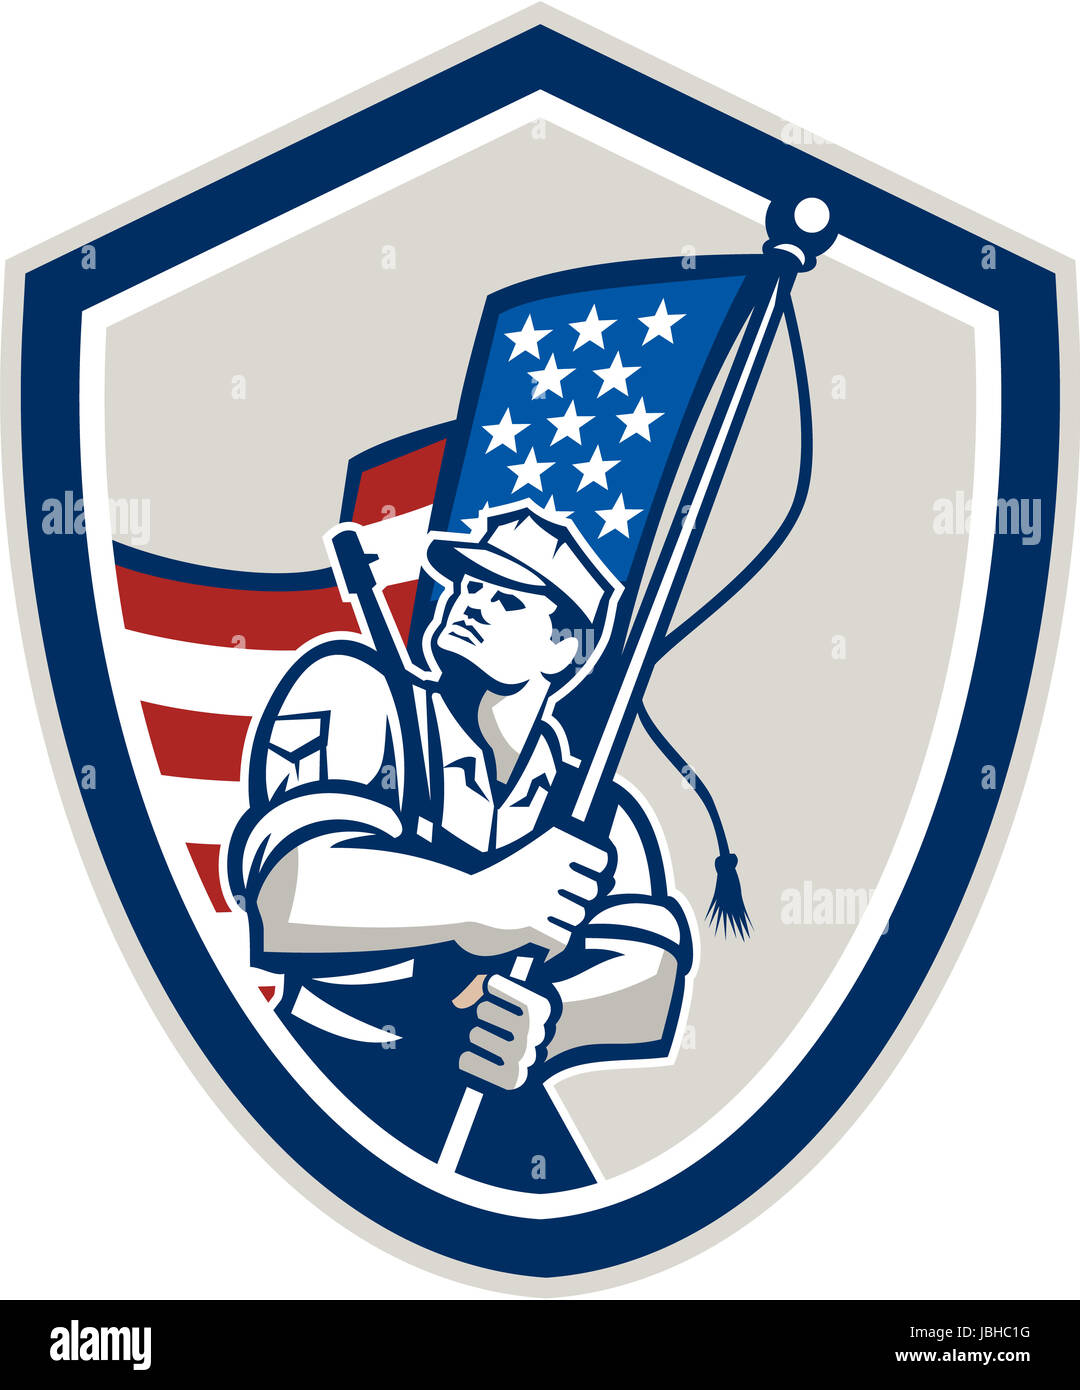 Illustration of an American soldier serviceman waving a USA stars and stripes flag viewed from front set inside shield crest shape done in retro style. Stock Photo